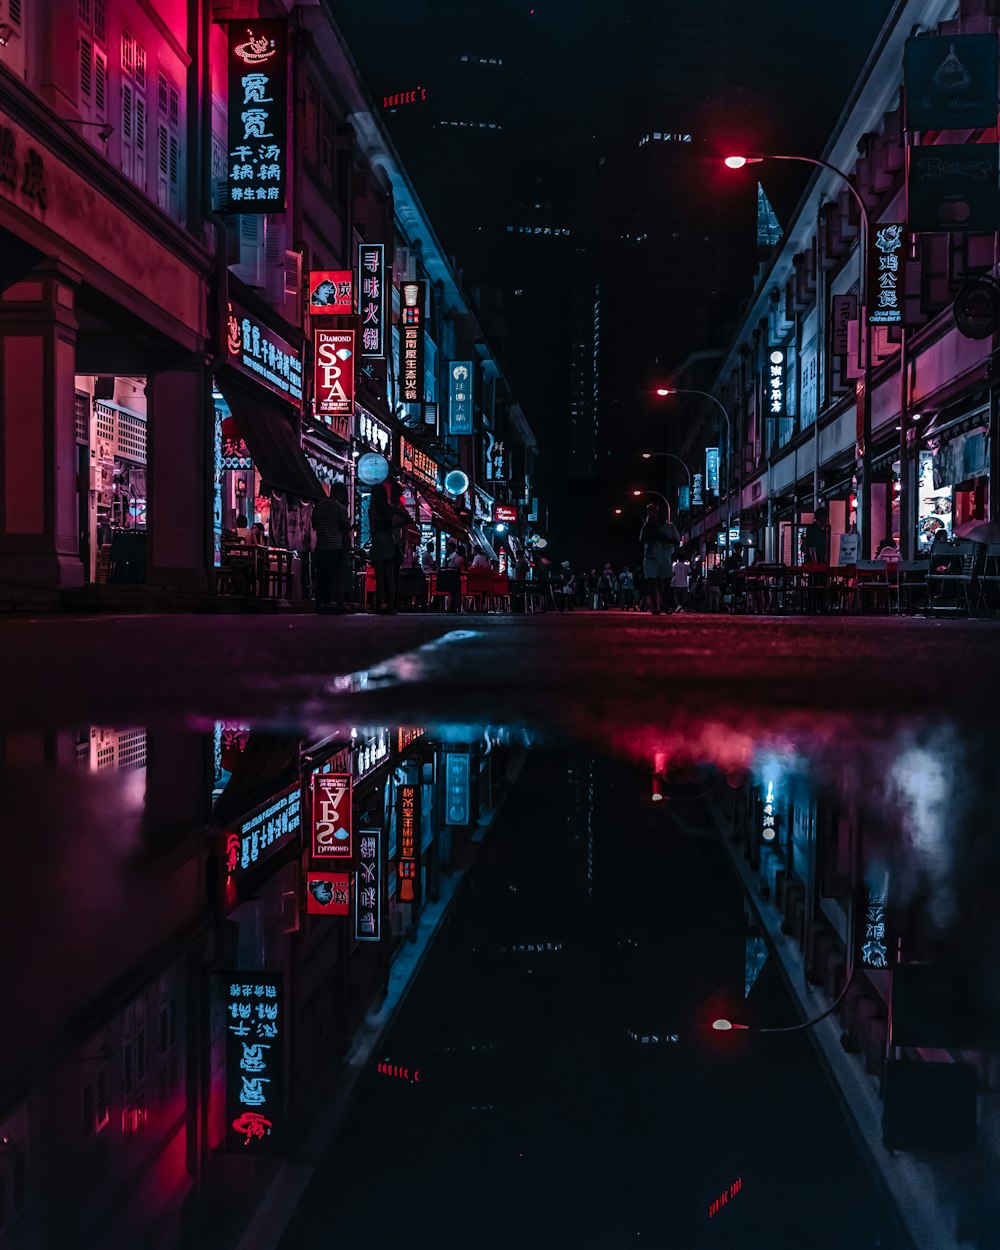 350+ [HQ] Night Light Pictures | Download Free Images & Stock Photos on  Unsplash